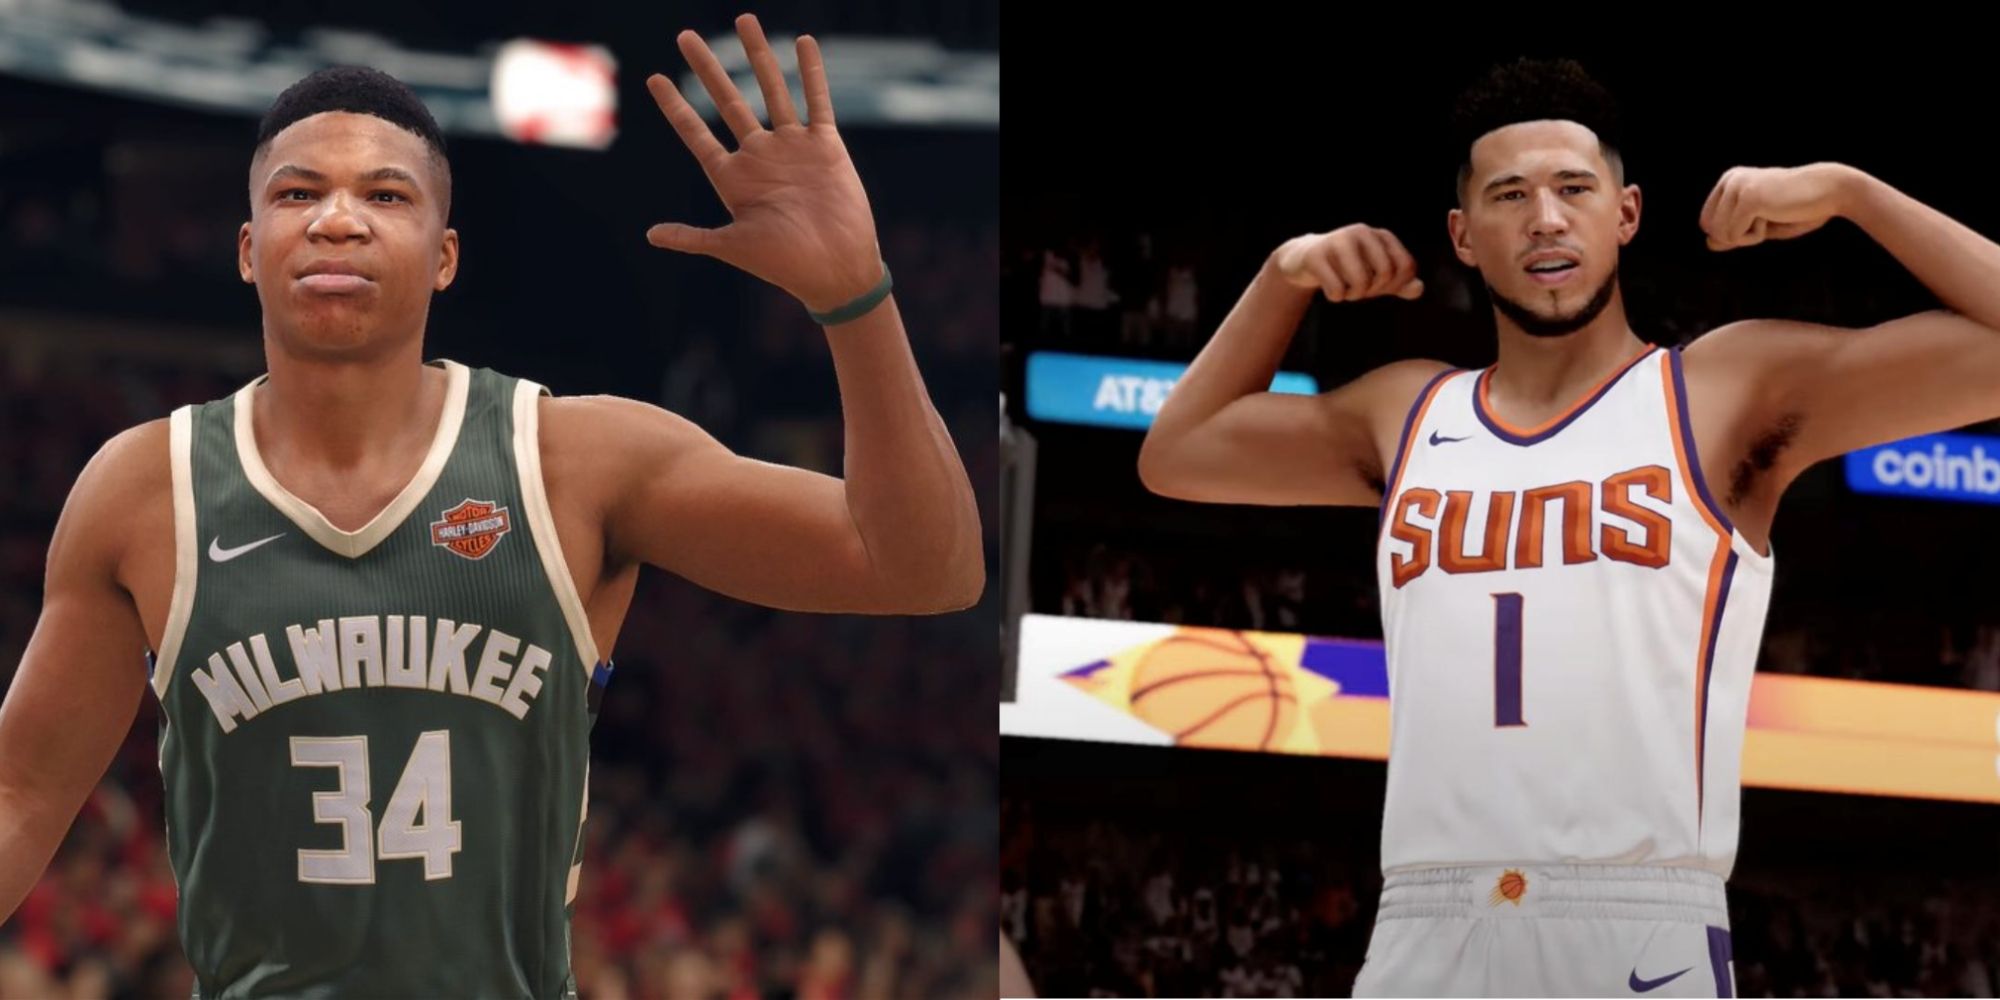 Split image of Giannis Antetokounmpo and Devin Booker